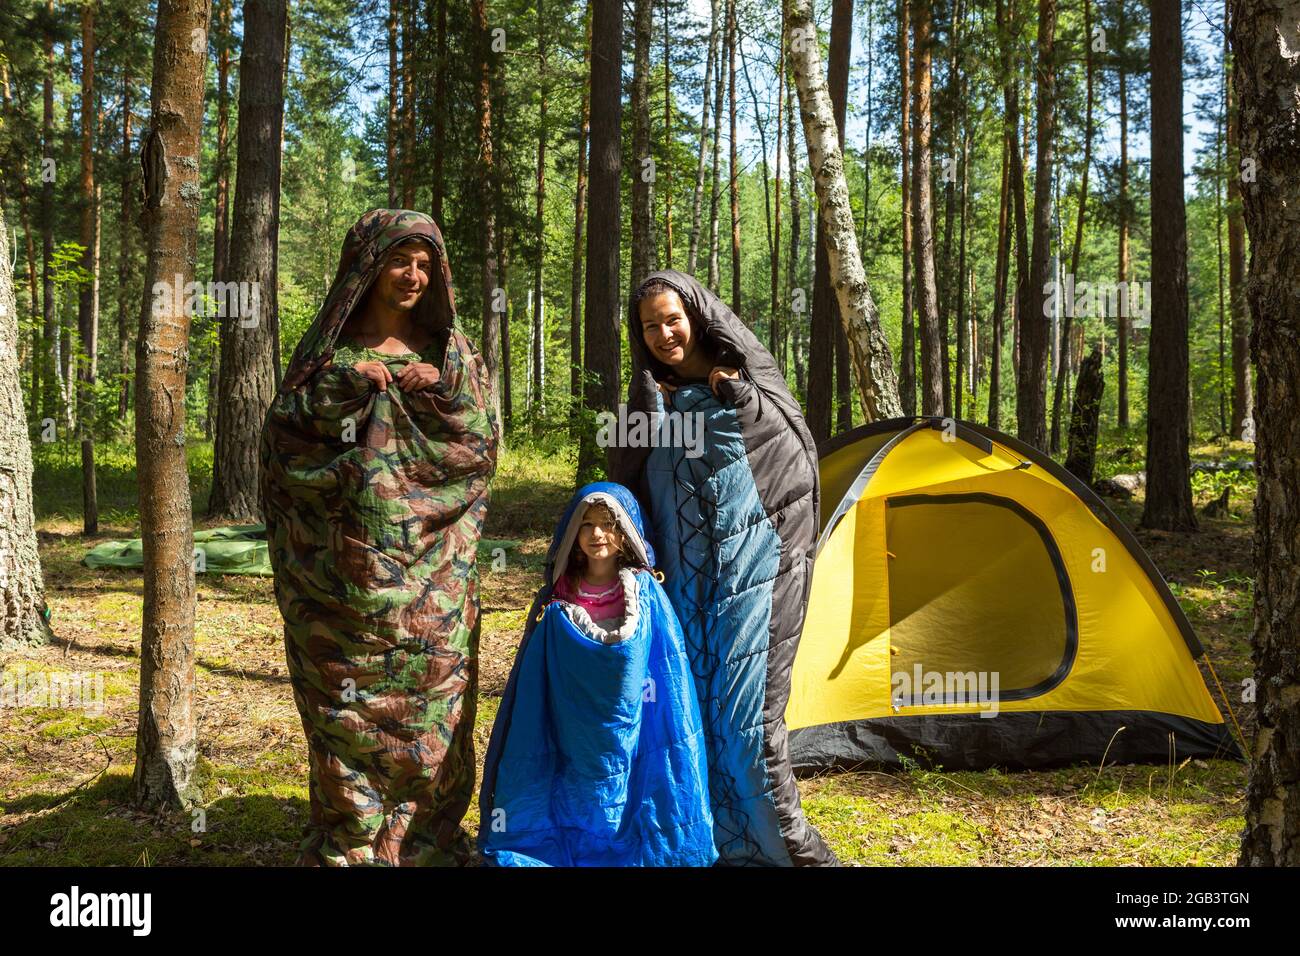 Family of tourists from a father, mother and little daughter pose in sleeping bags near a tent. Family outdoor recreation, domestic tourism, camping, Stock Photo